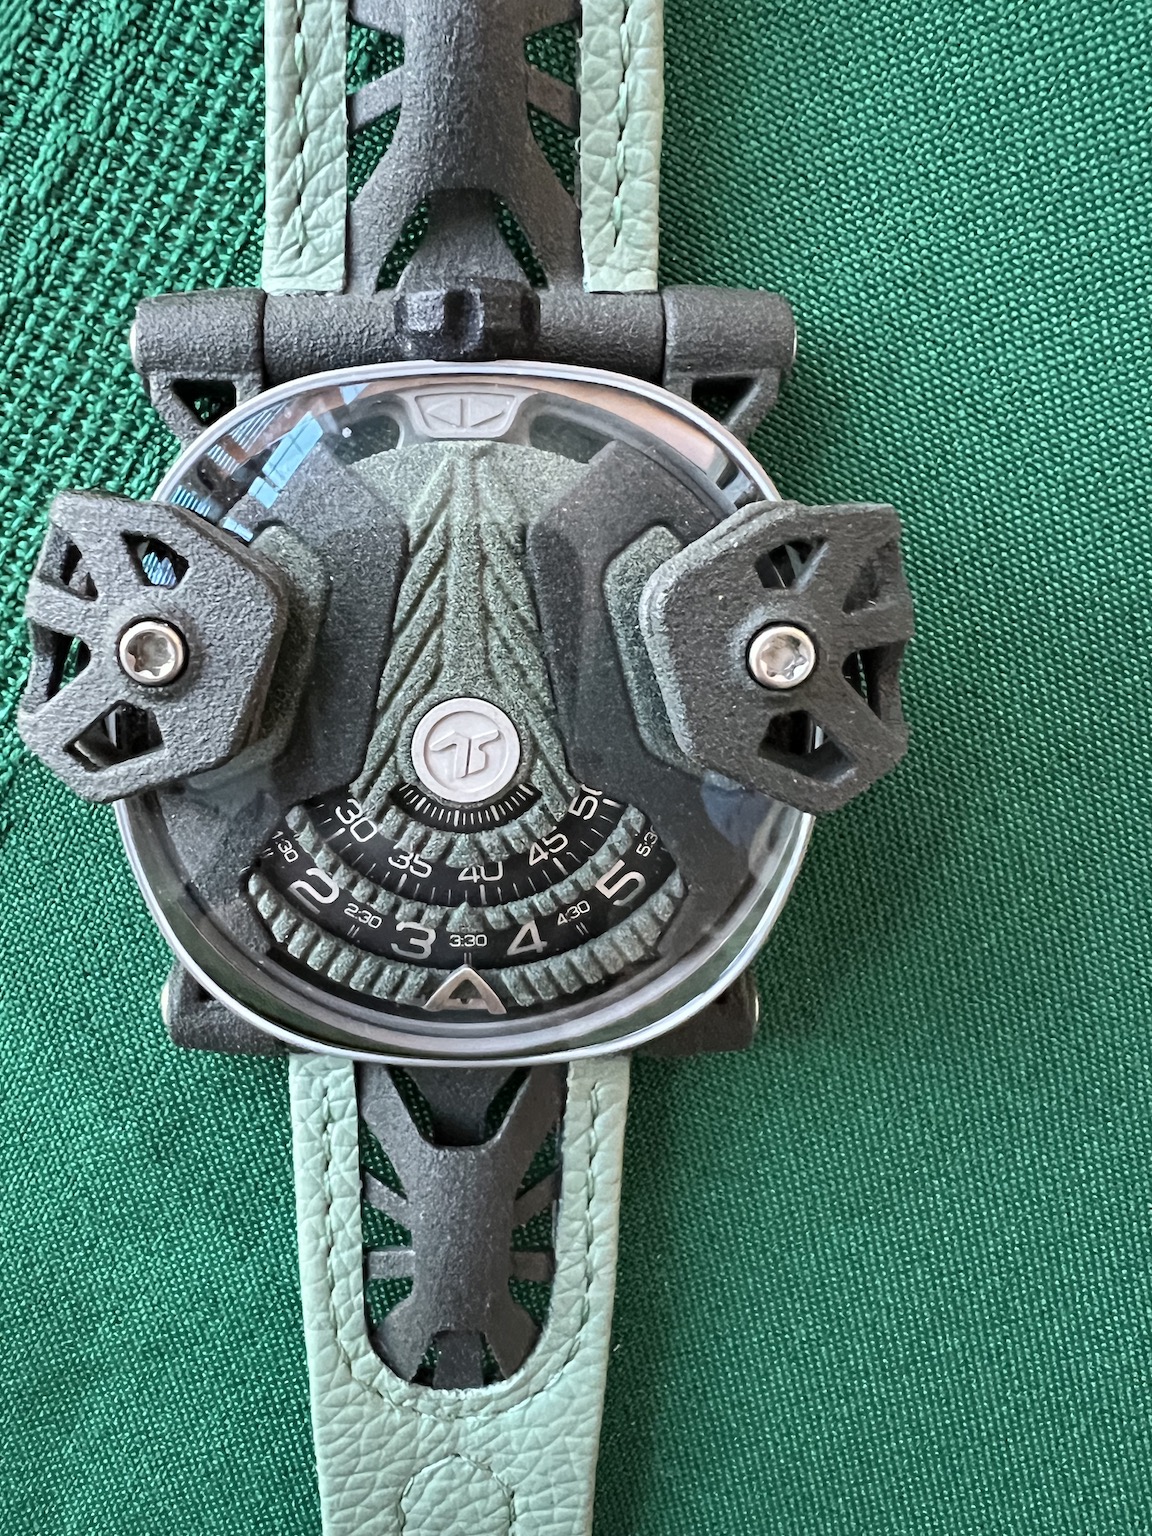 Watch Review: SevenFriday Free-D Green On The Wrist